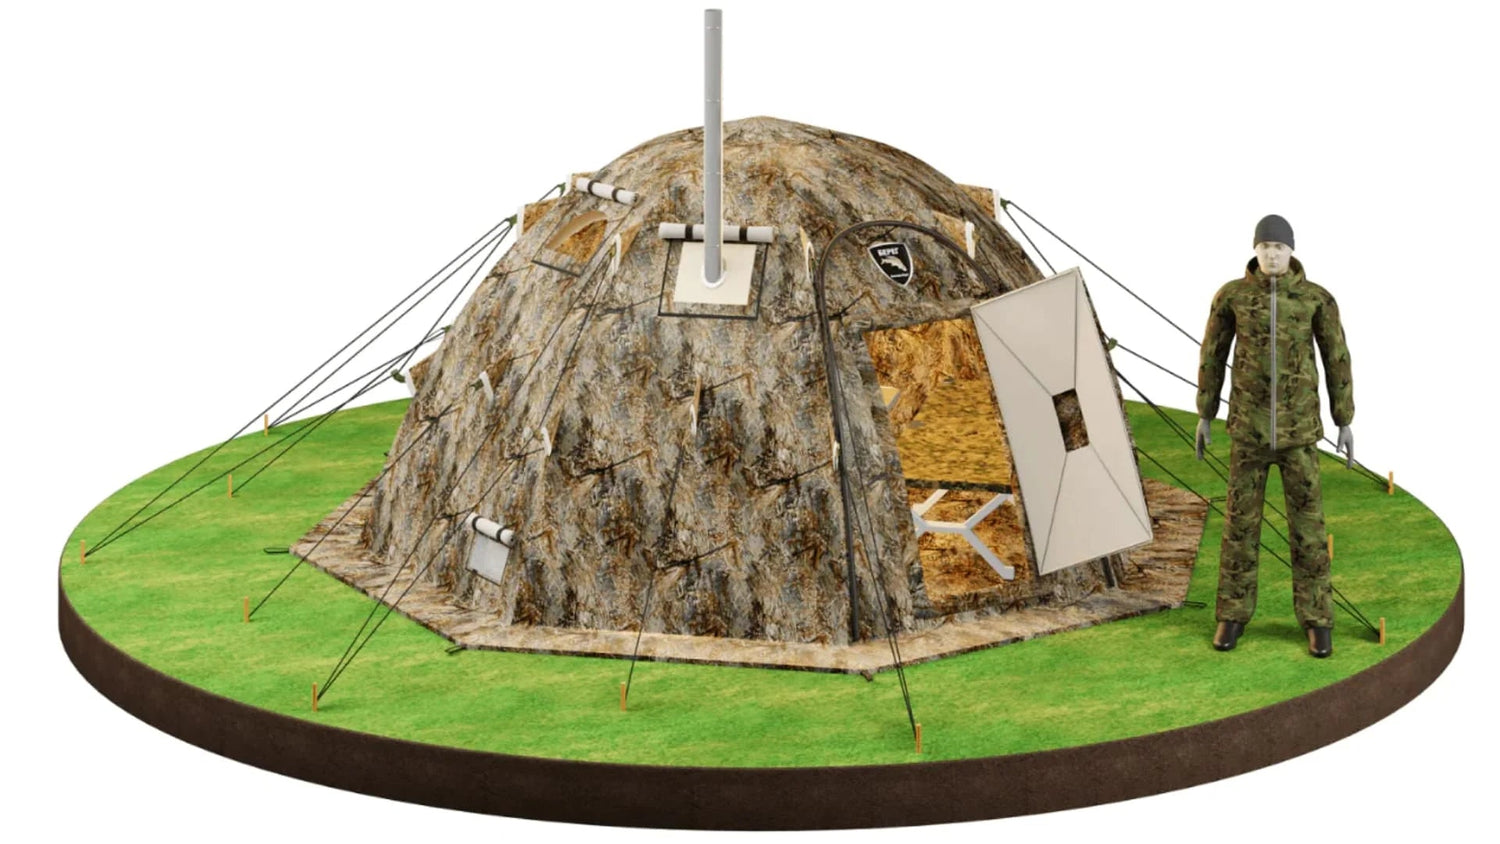 RBM Outdoors - All-Season Tent with Stove Jack "UP-2". Best tent for 1-4 person - Big Horn Golfer